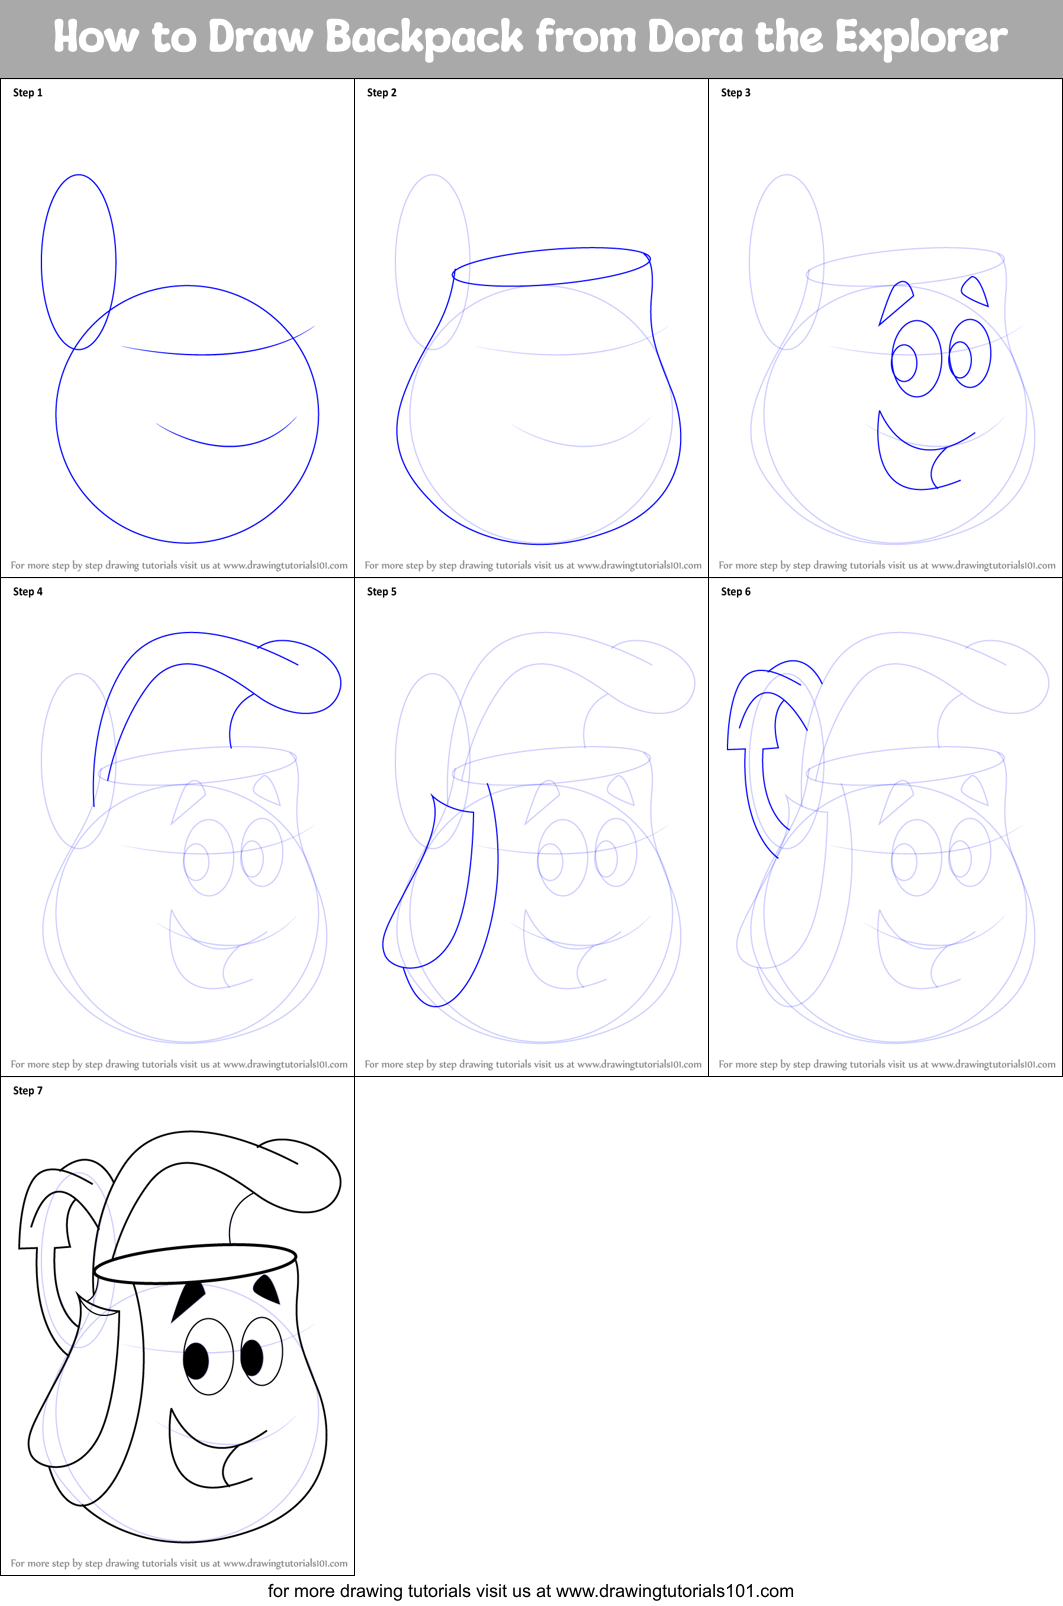 How to Draw Backpack Dora the Explorer printable step by step drawing sheet : DrawingTutorials101.com